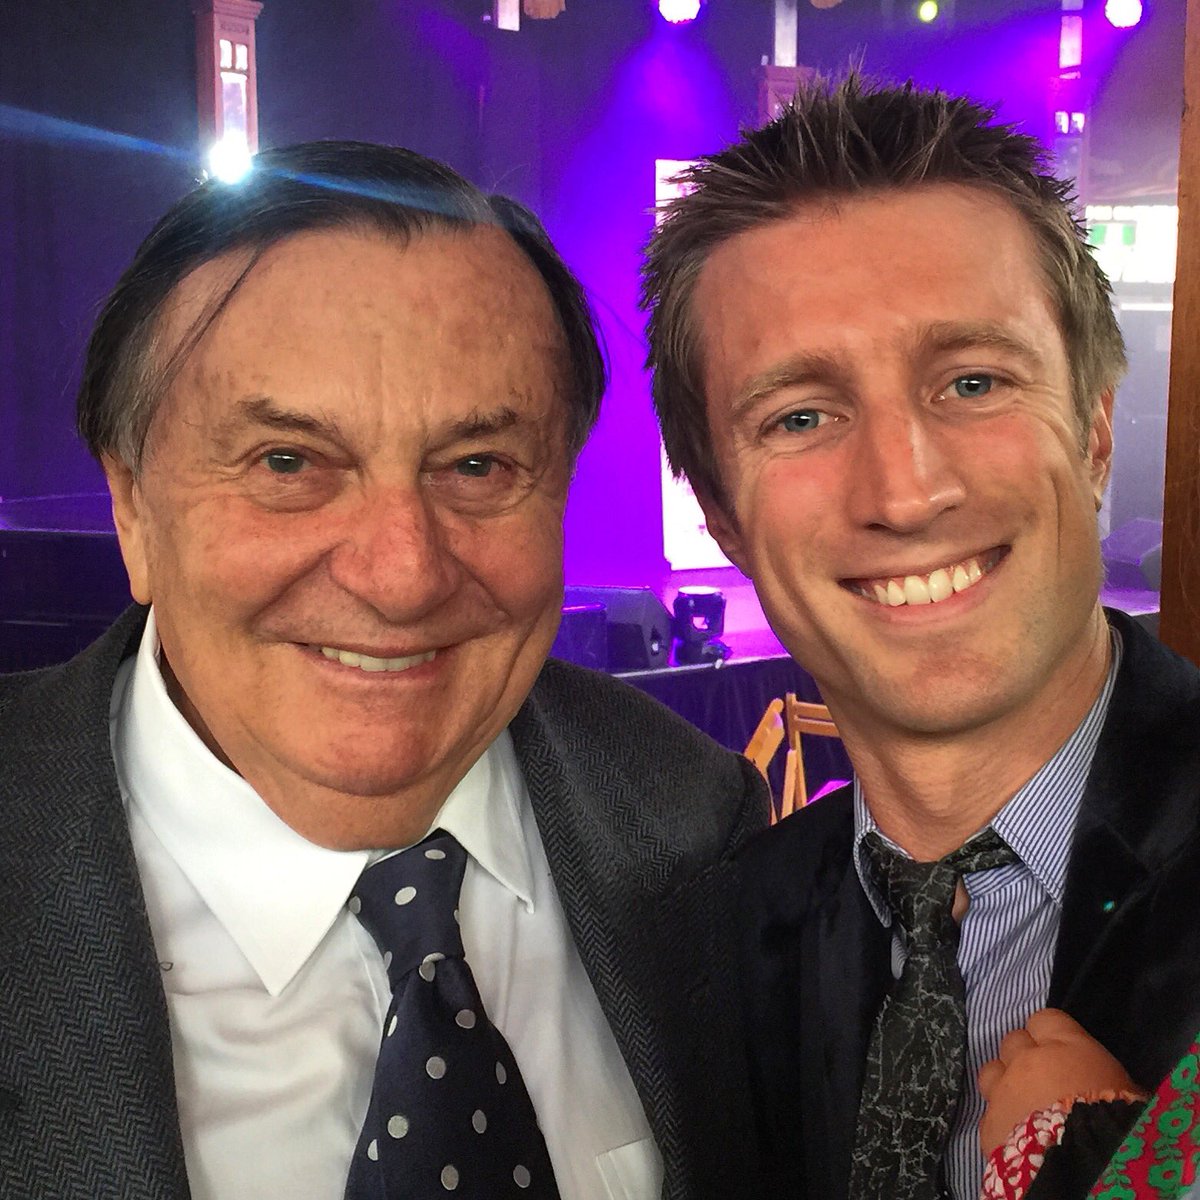 @SammyJ_comedian hanging out with #barryhumphries at @micomfestival 2016 #barryawards nominations yesterday